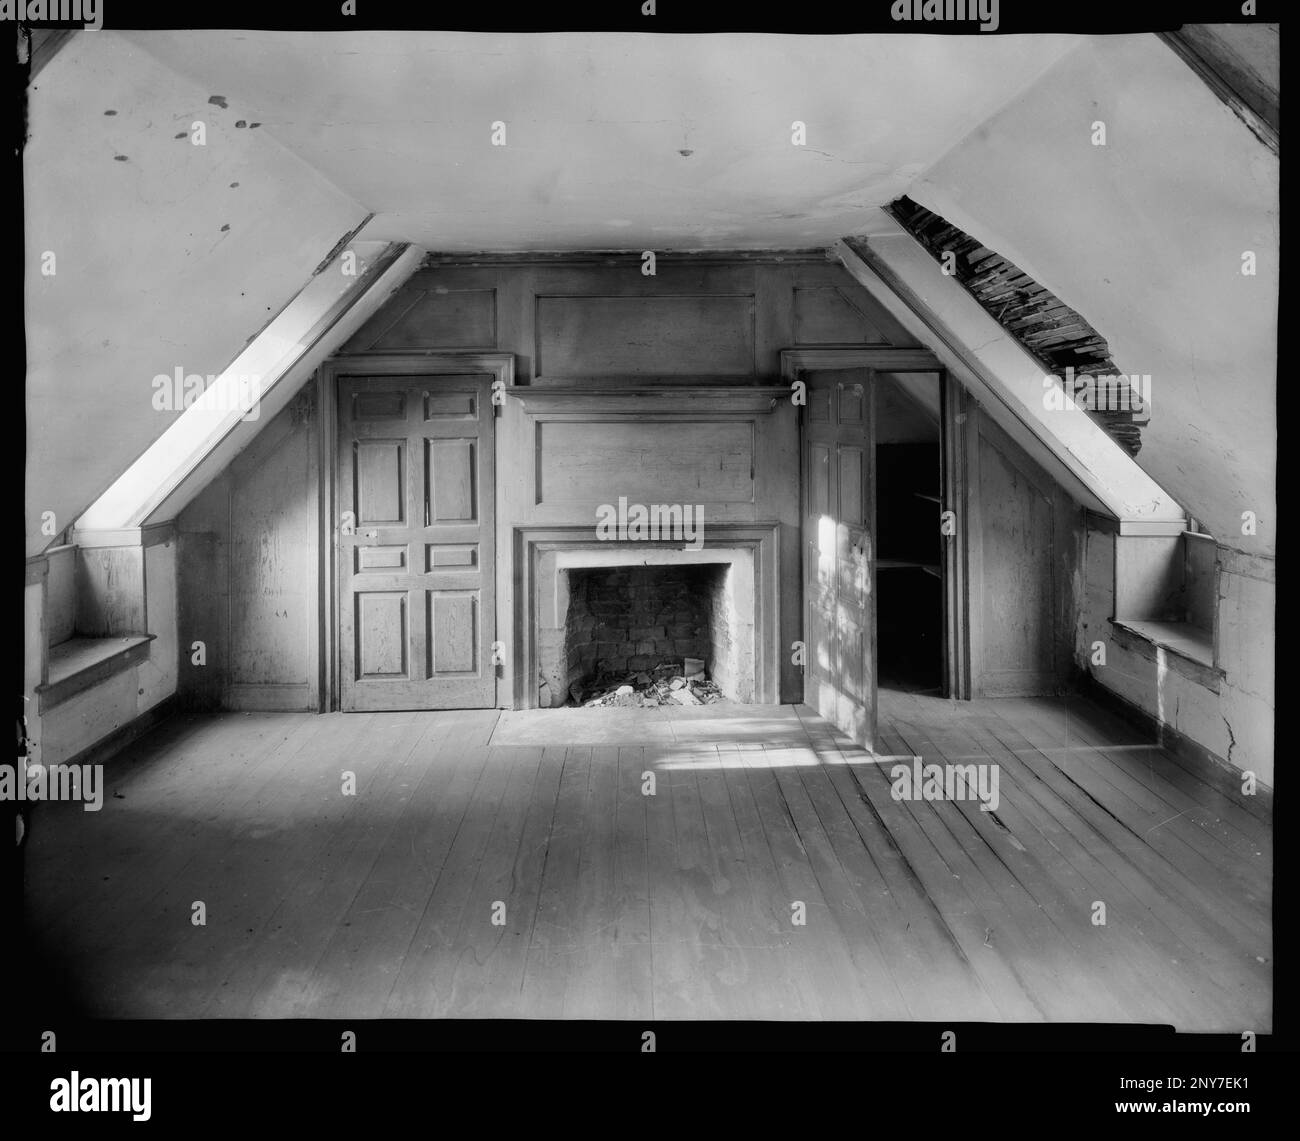 Wigwam, Powhatan County, Virginia. Carnegie Survey of the Architecture of the South. United States  Virginia  Powhatan County, Paneling, Attics. Stock Photo